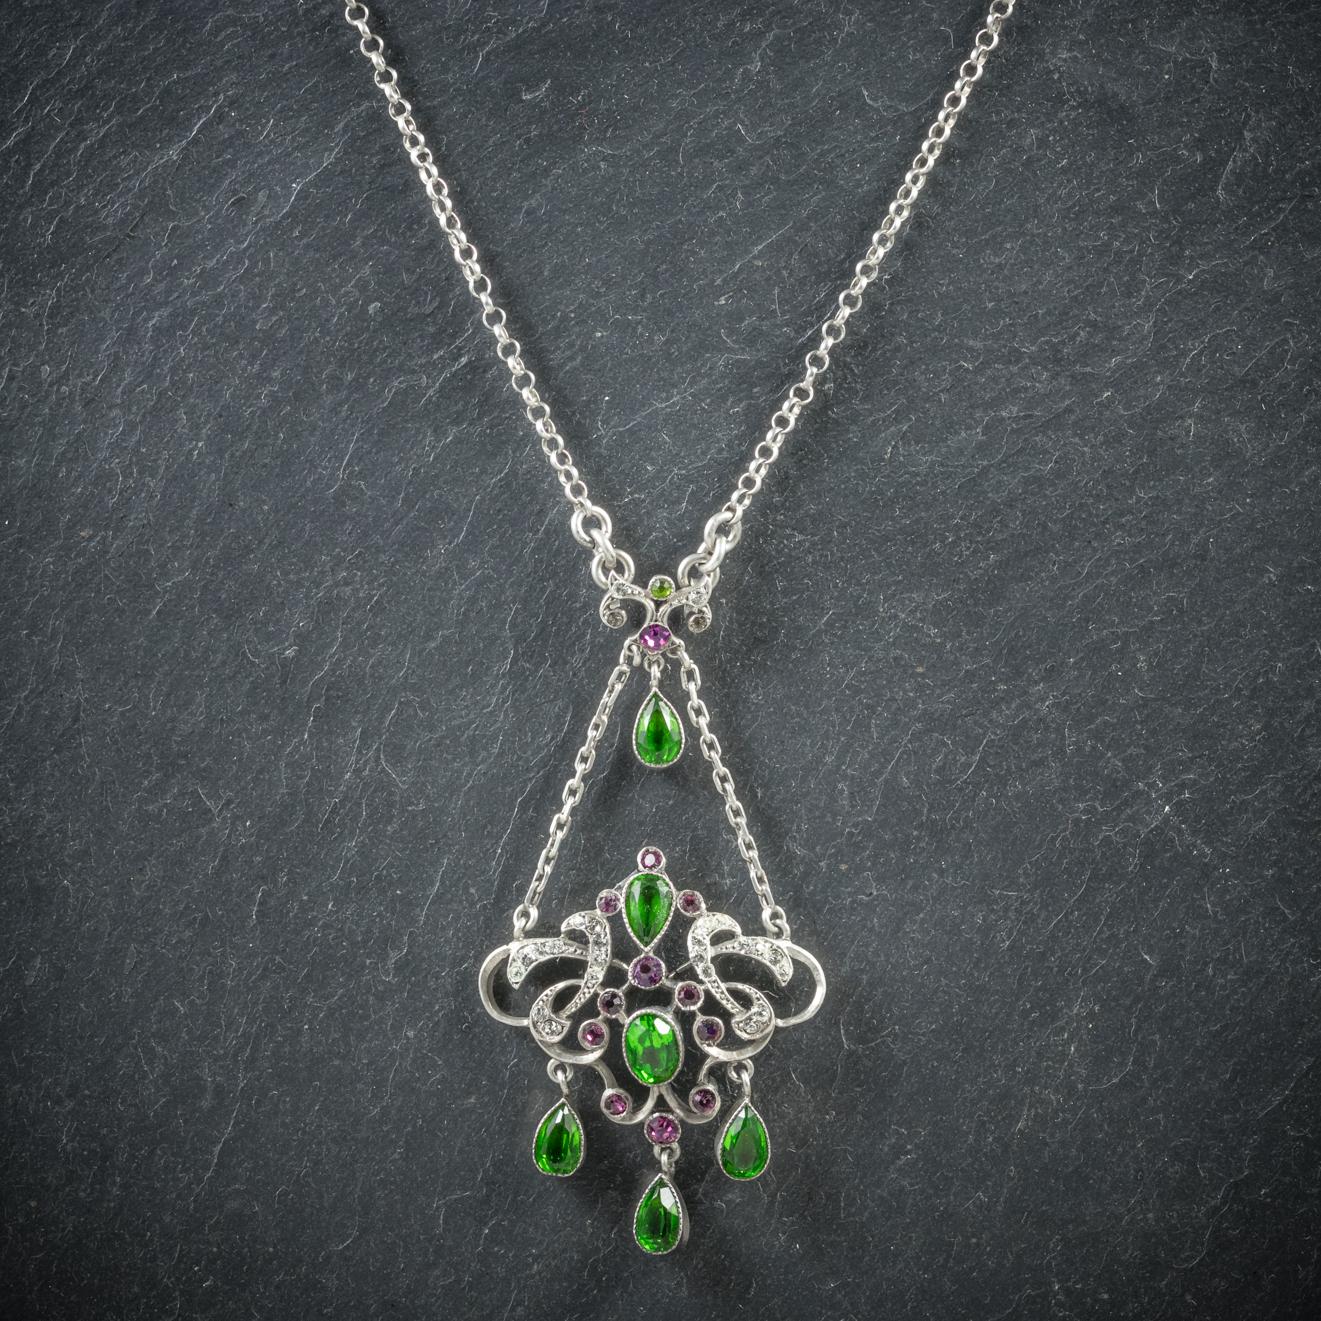 This wonderful antique Victorian pendant necklace was made representing the Suffragette movement, Circa 1900

The fabulous pendant is decorated in appox. 2.4ct of green Tourmaline, 0.6ct of Amethyst and 0.6ct of white Paste

The pendant boasts three